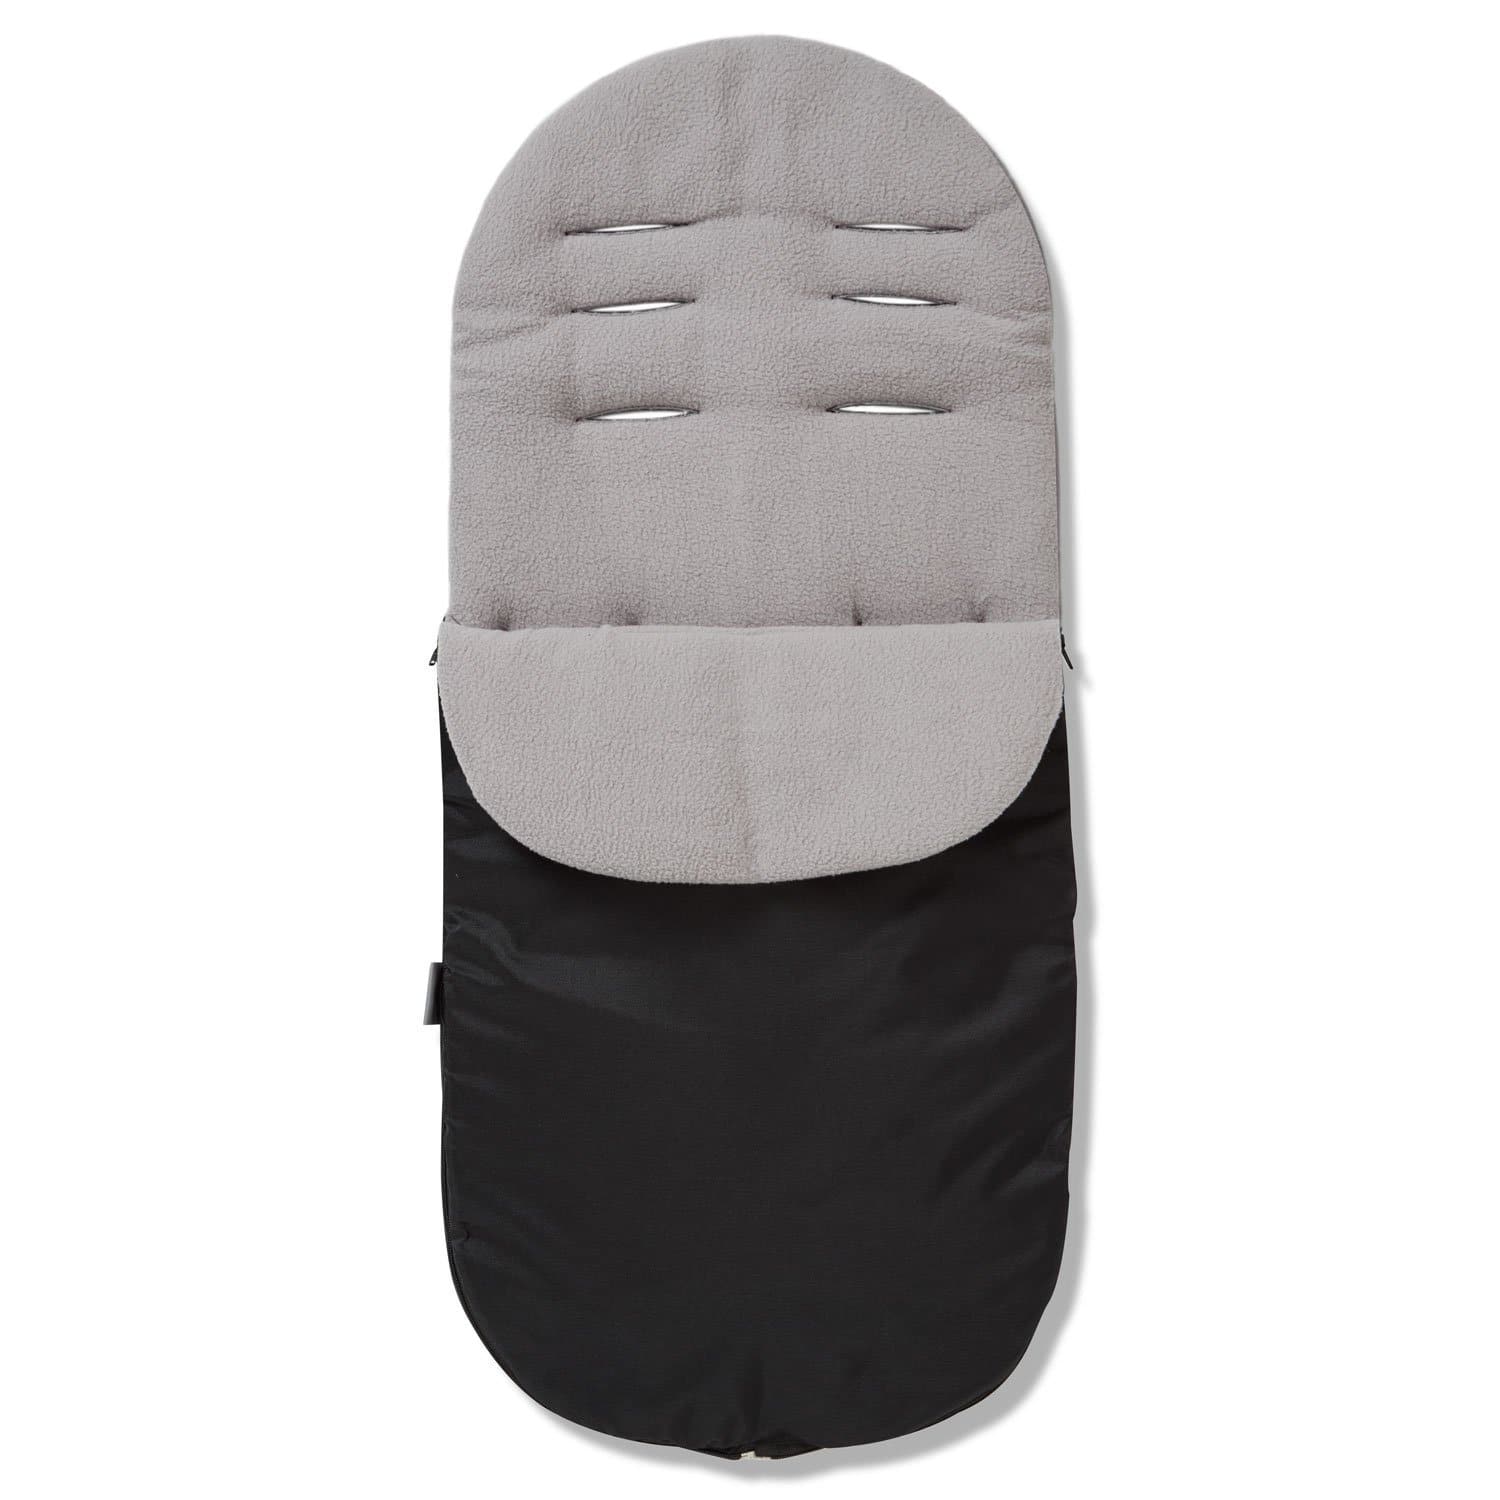 Footmuff / Cosy Toes Compatible with Tutti Bambini - Grey / Fits All Models | For Your Little One